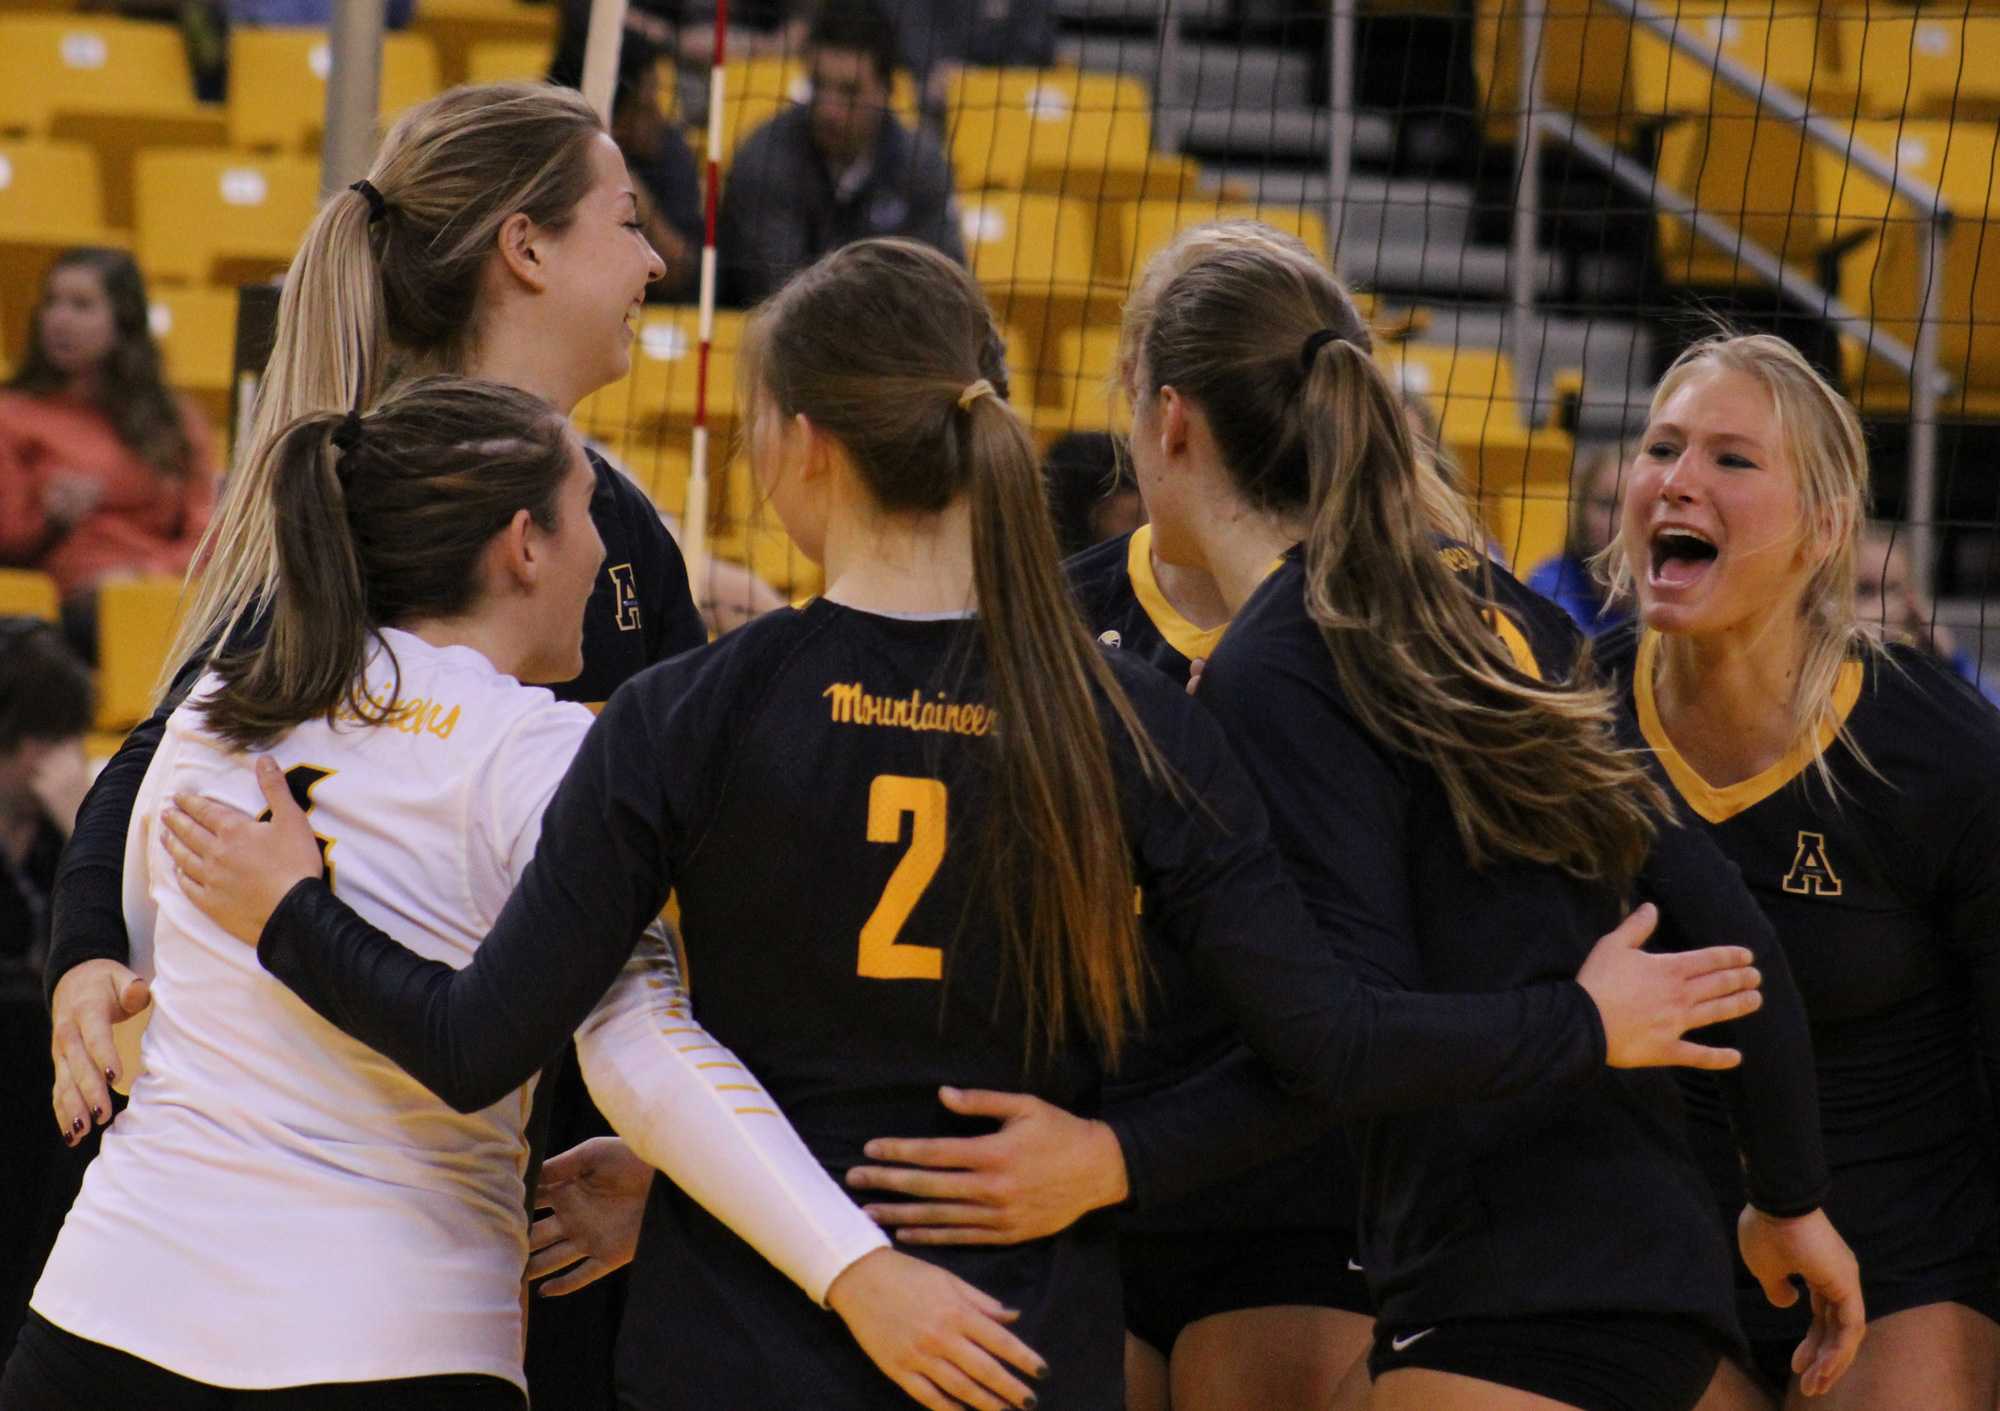 App State volleyball celebrate after winning a set during Fridays match against Georgia State.
Photo credit: Emory Kumpe, Photographer